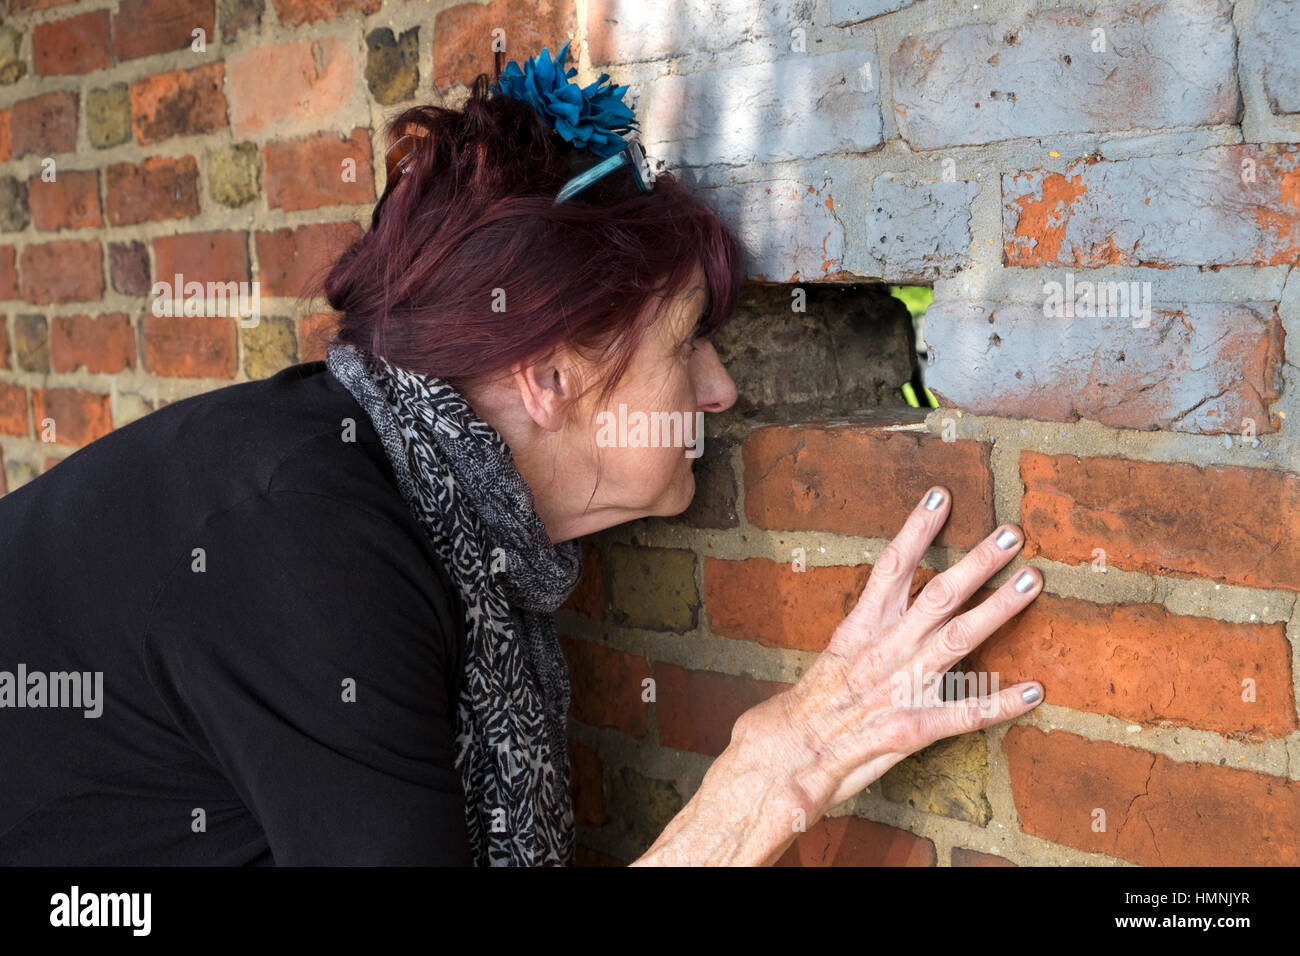 Woman looking through a hole in a brick wall Stock Photo